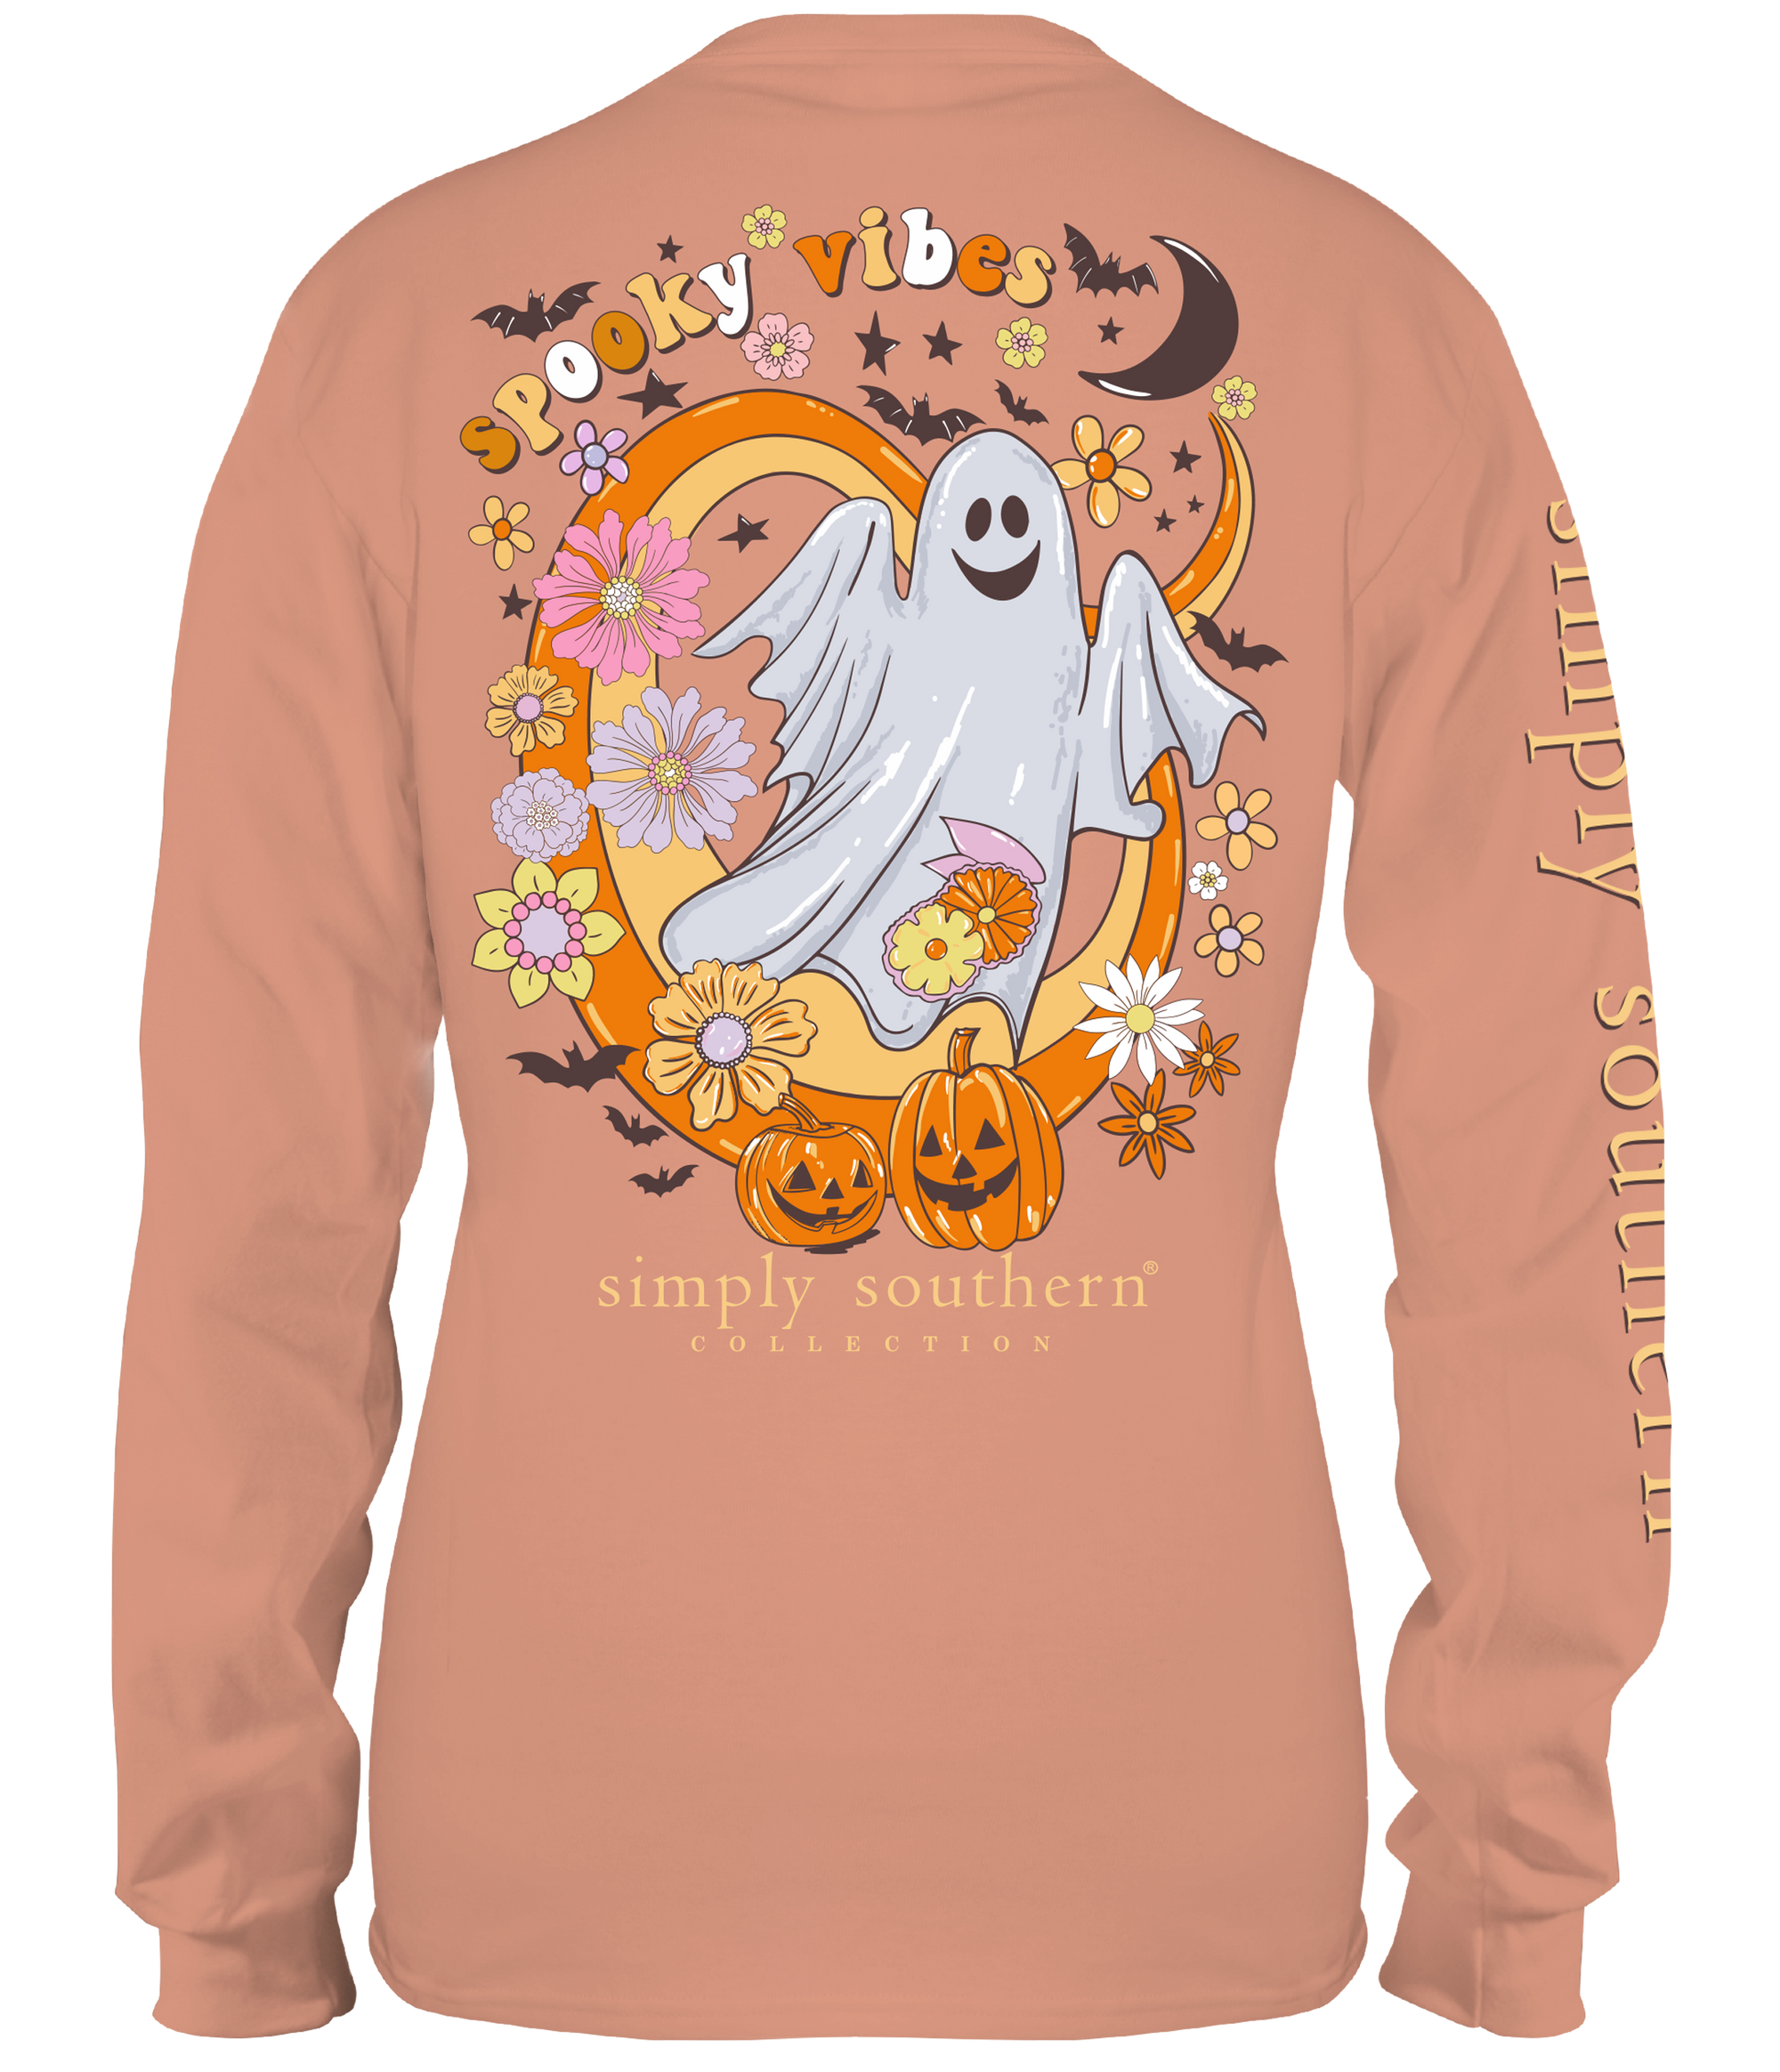 Simply Southern Spooky Vibes Fall Long Sleeve T-Shirt